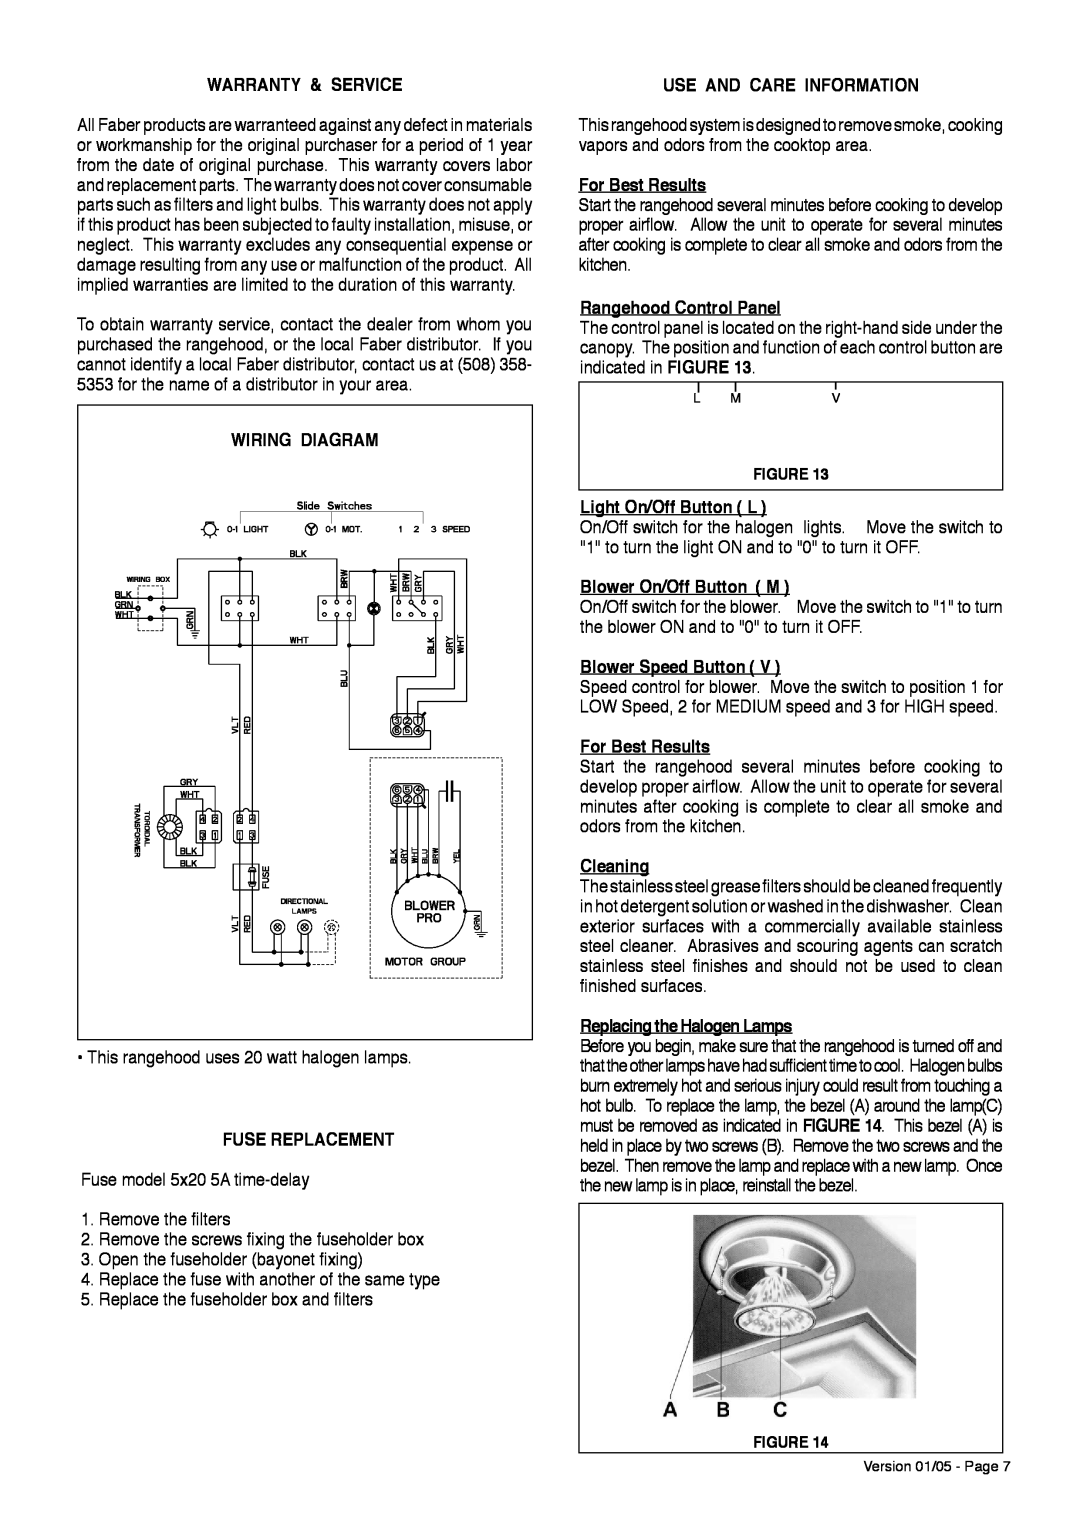 Faber 5x20 5A installation instructions Warranty & Service 